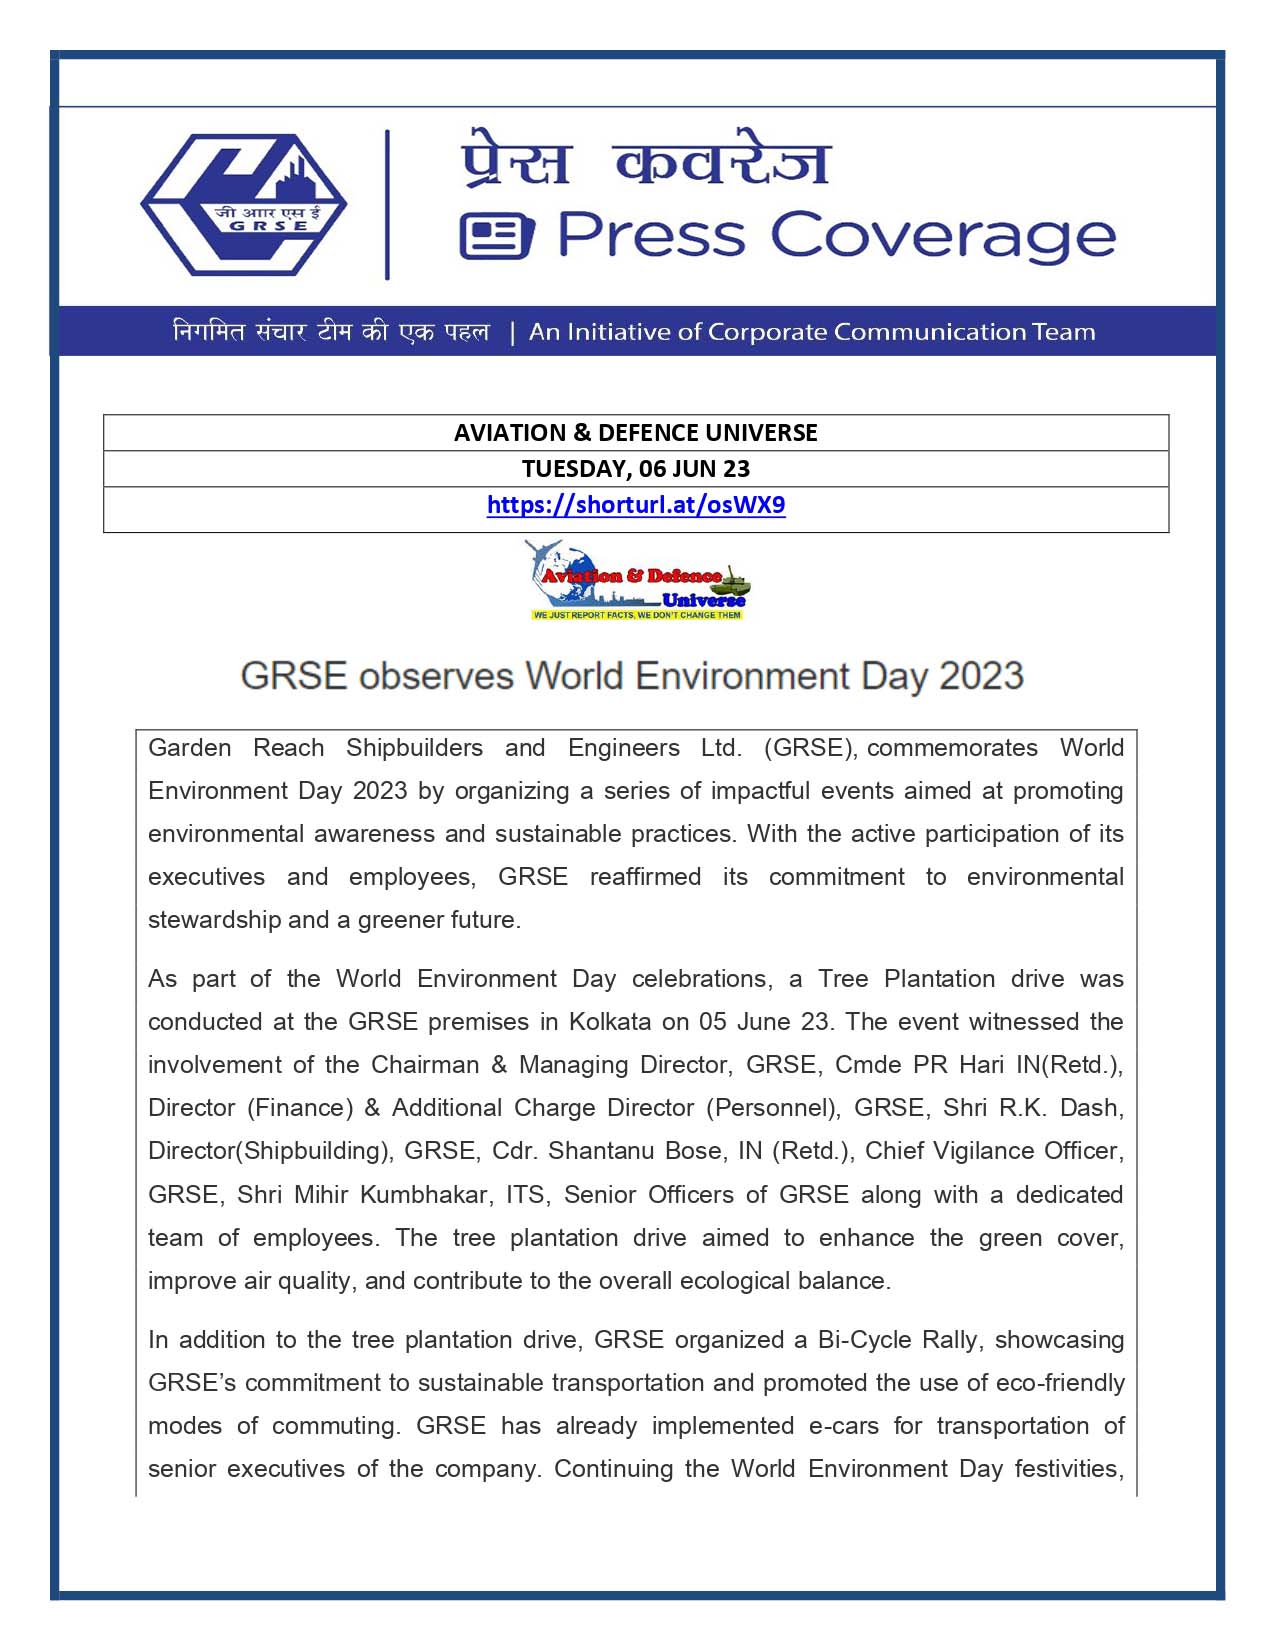 GRSE observes World Environment Day 2023